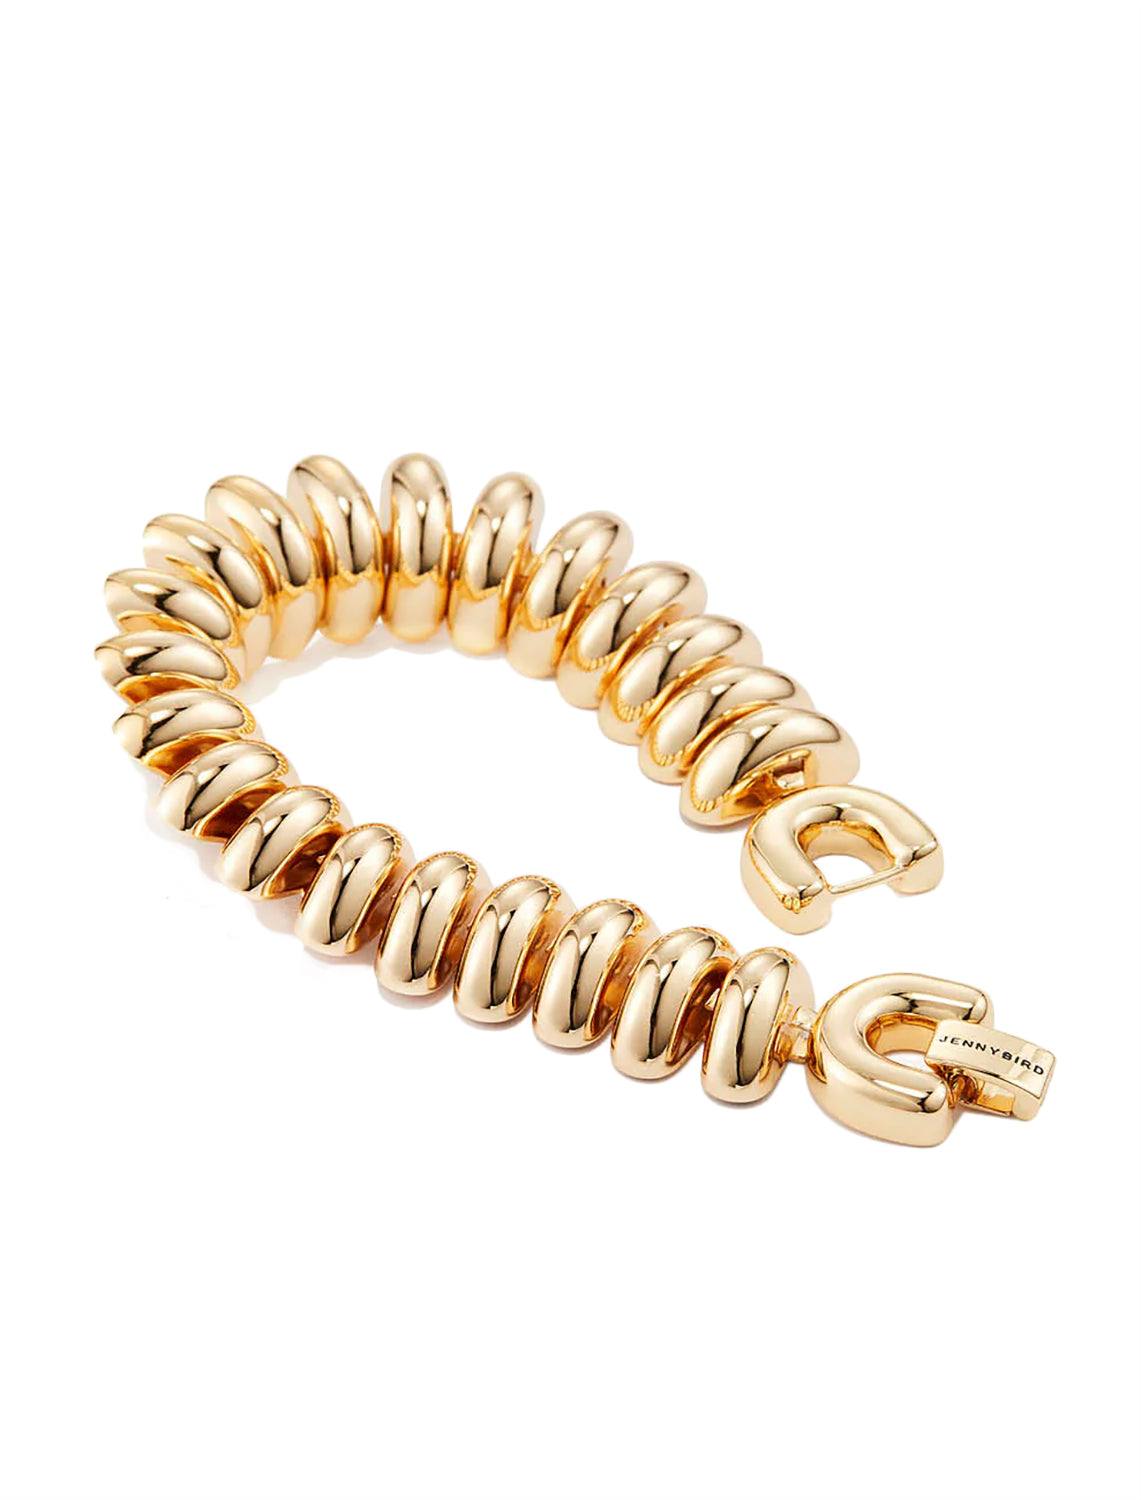 Delicate Beaded Bracelet in Gold Fatigue - Fuession Jewelry